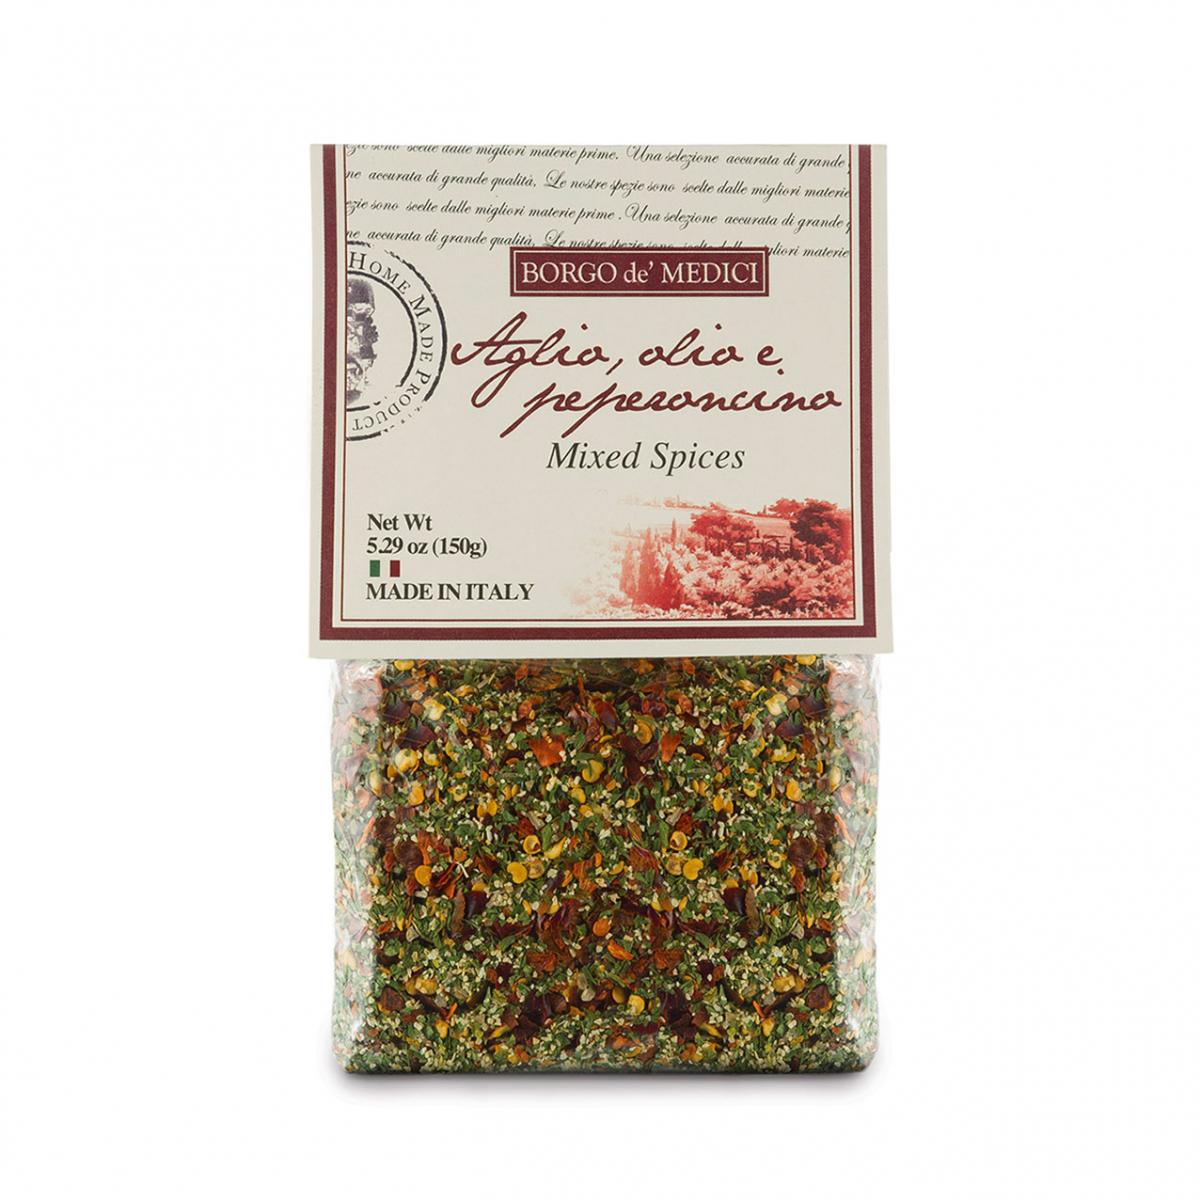 MIXED SPICES Seasoning